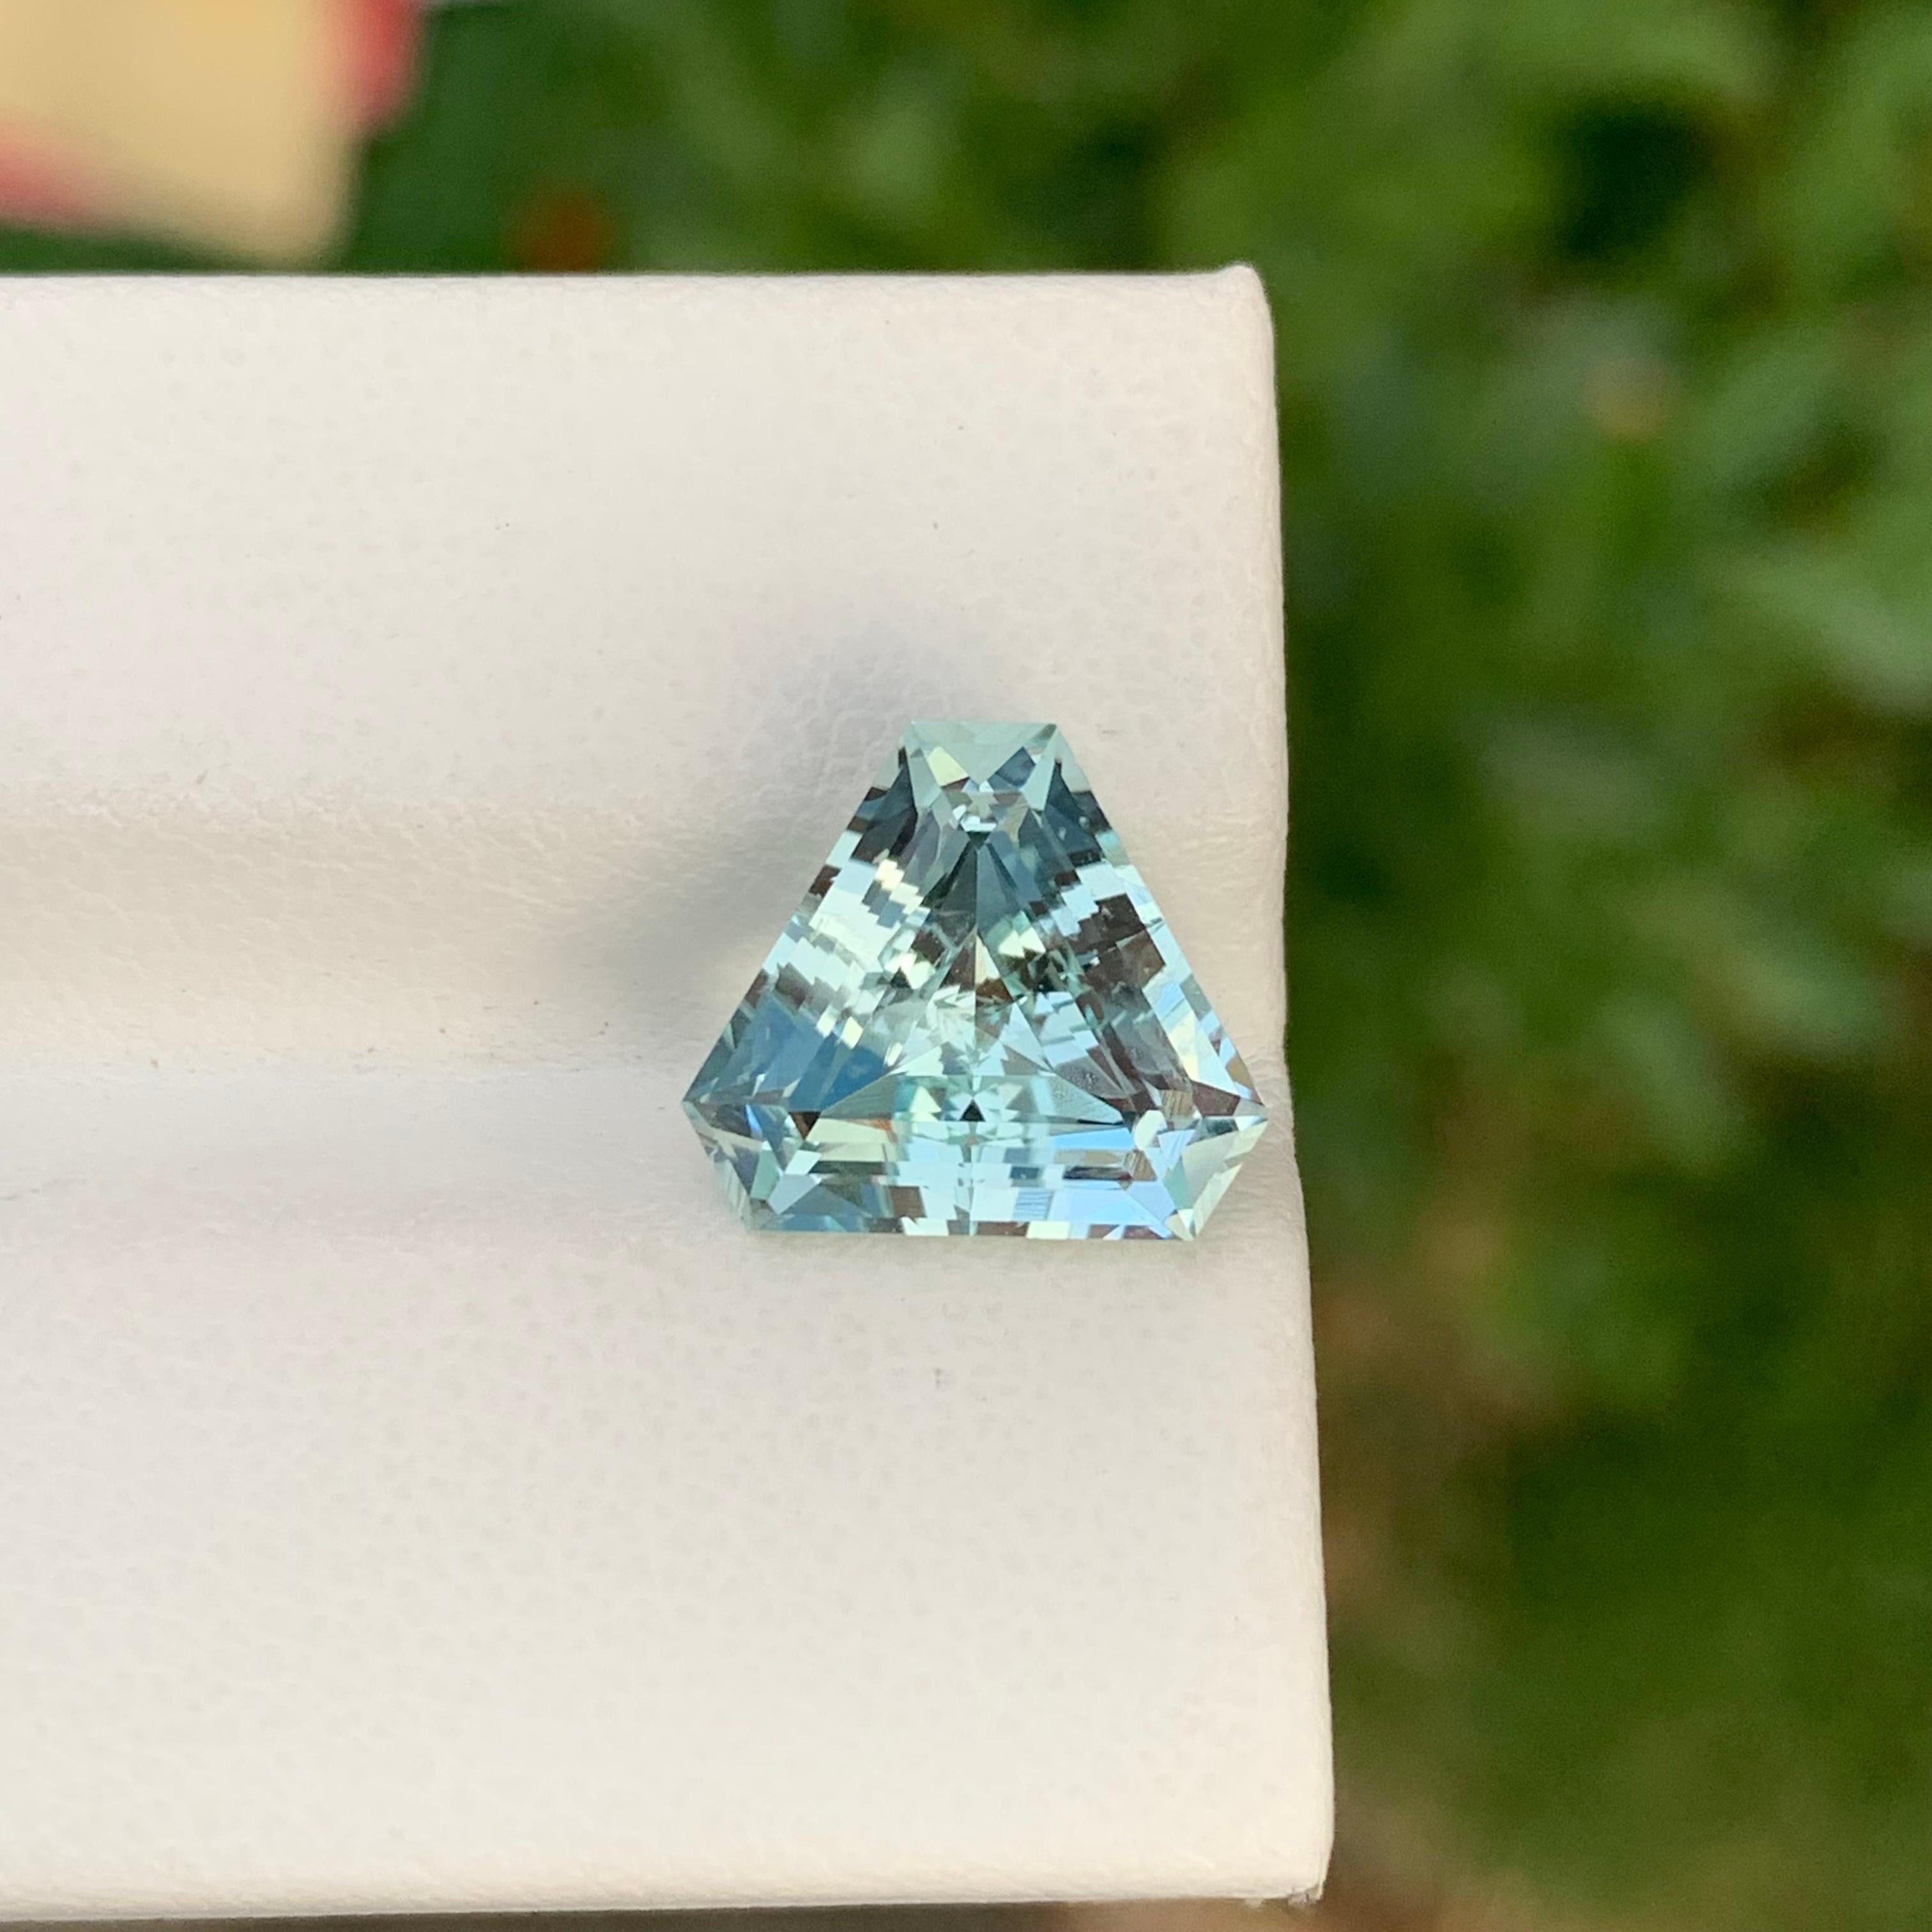 Loose Aquamarine
Weight: 3.80 Carat
Dimension: 10.3 x 10.3 x 6.5 Mm
Colour : Pale Blue
Origin: Shigar Valley, Pakistan
Treatment: Non
Certificate : On Demand
Shape: Trillion 

Aquamarine is a captivating gemstone known for its enchanting blue-green